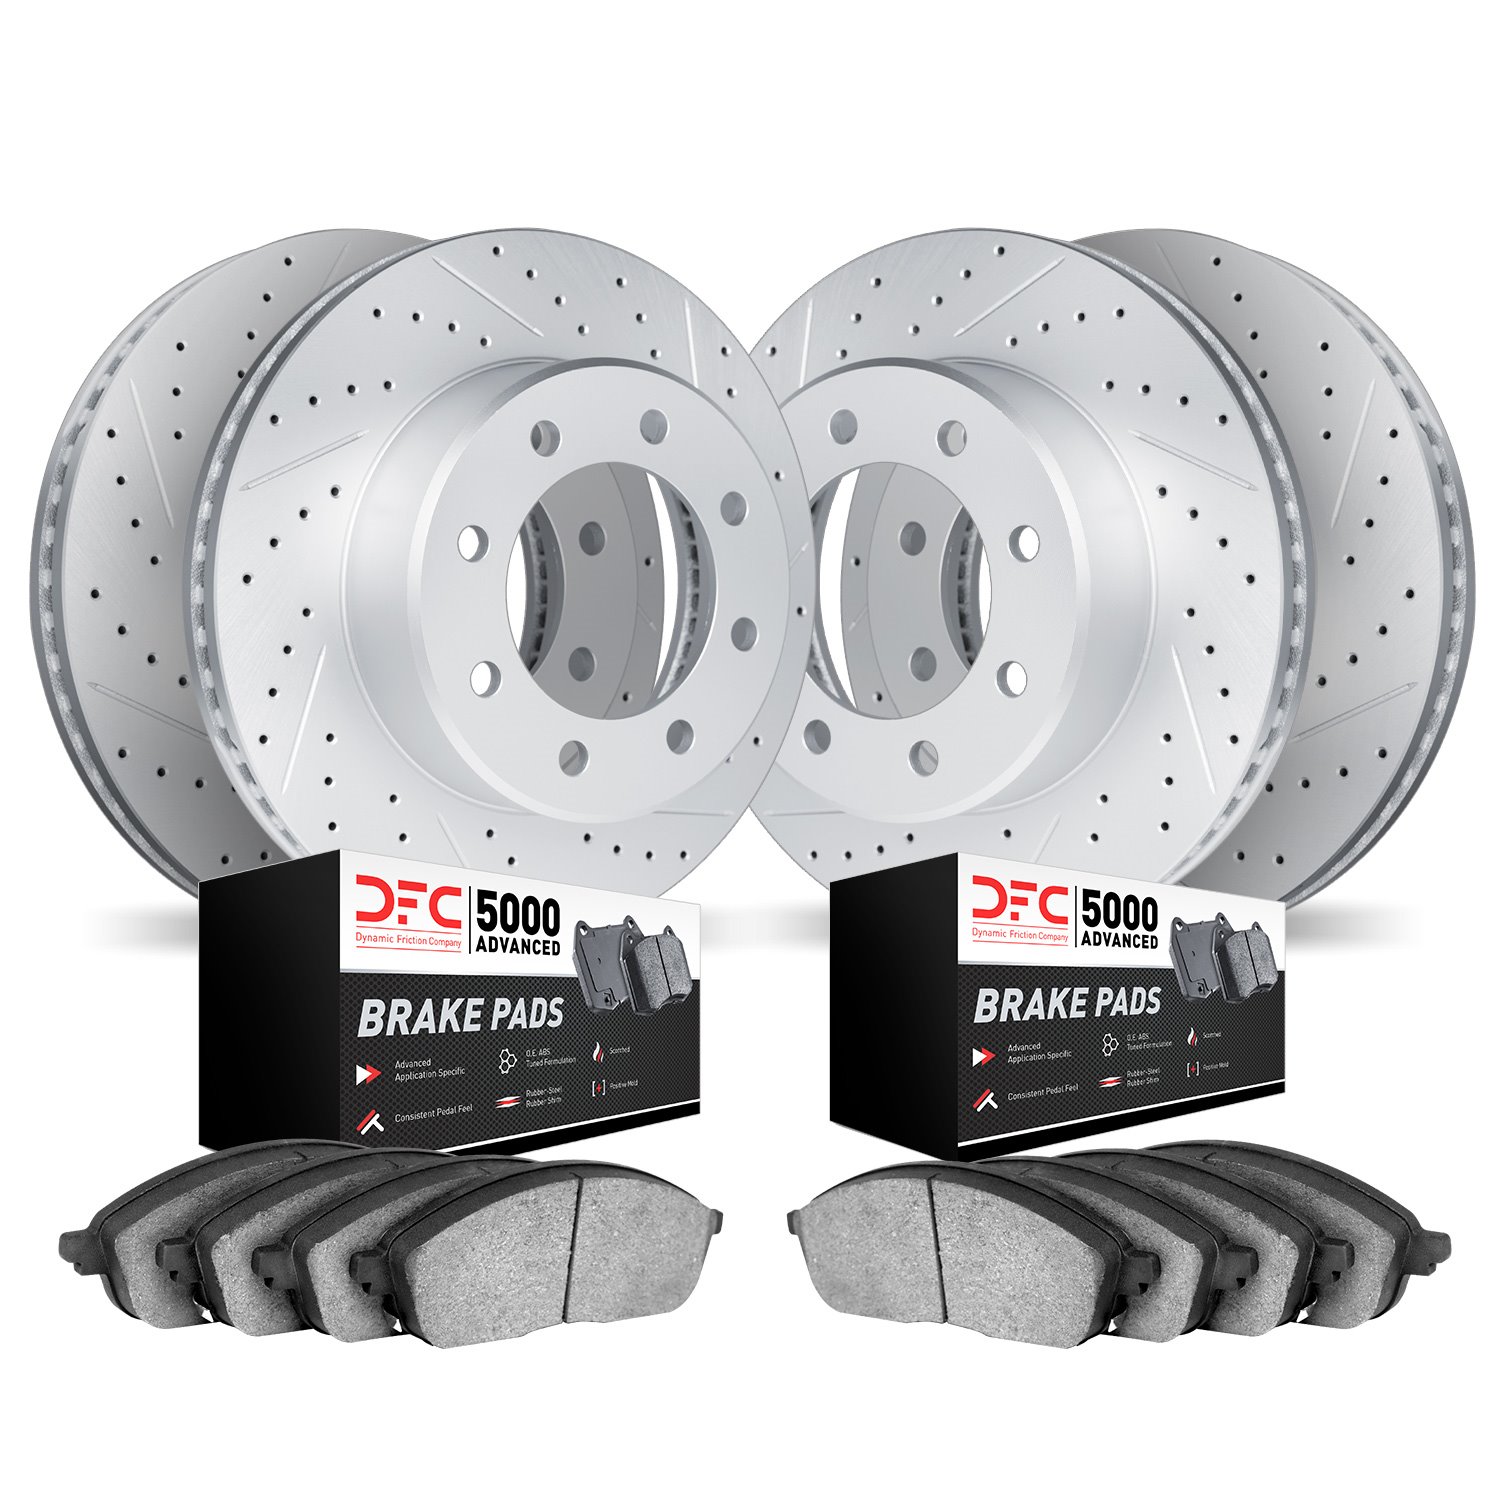 2504-54283 Geoperformance Drilled/Slotted Rotors w/5000 Advanced Brake Pads Kit, 2012-2012 Ford/Lincoln/Mercury/Mazda, Position: